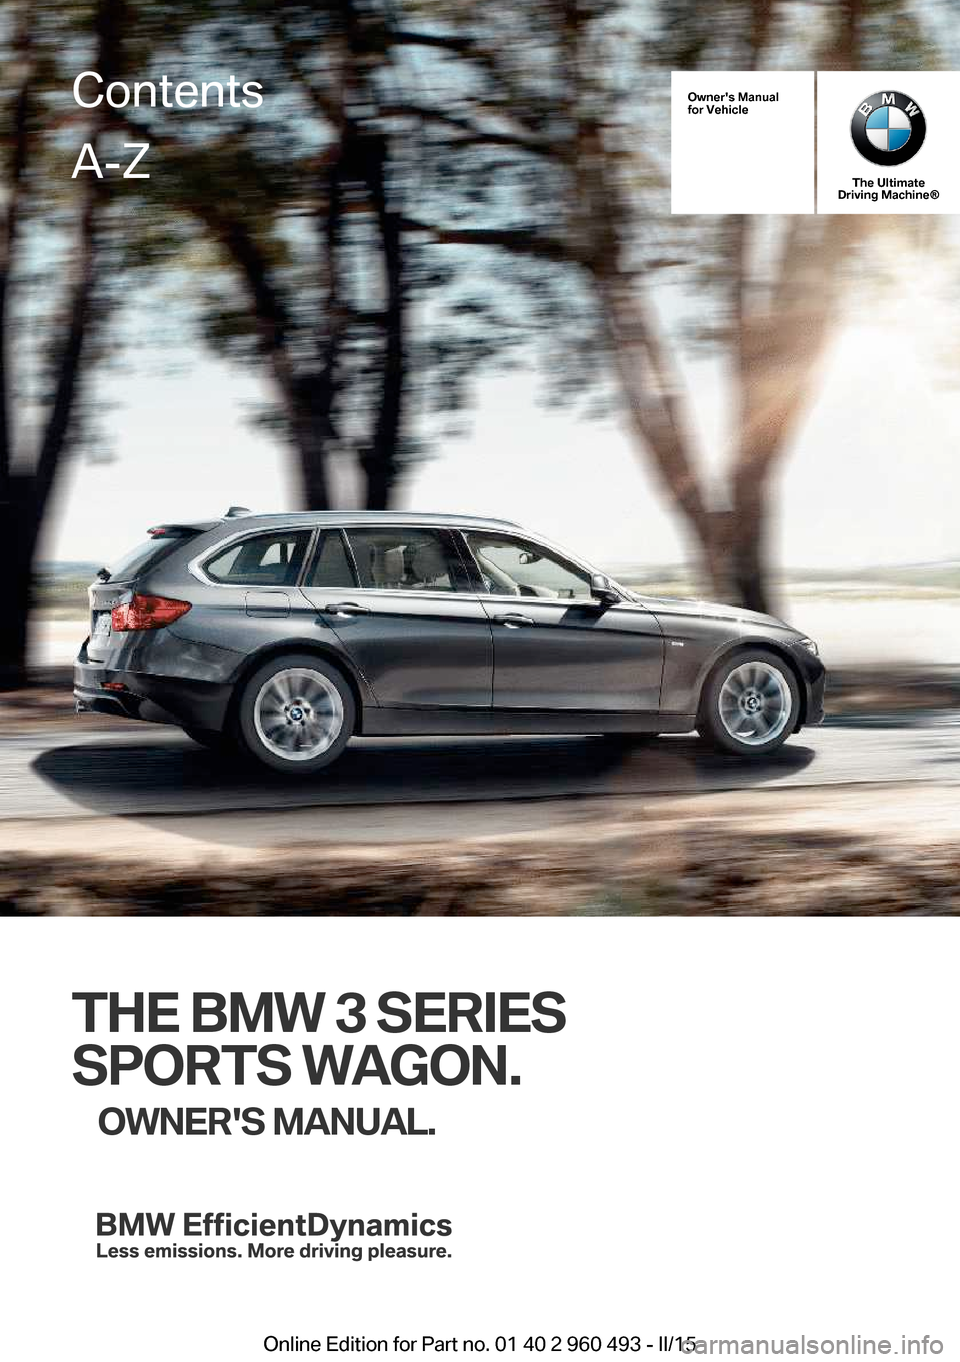 BMW 3 SERIES SPORTS WAGON 2015 F31 Owners Manual Owners Manual
for Vehicle
The Ultimate
Driving Machine®
THE BMW 3 SERIES
SPORTS WAGON. OWNERS MANUAL.
ContentsA-Z
Online Edition for Part no. 01 40 2 960 493 - II/15   